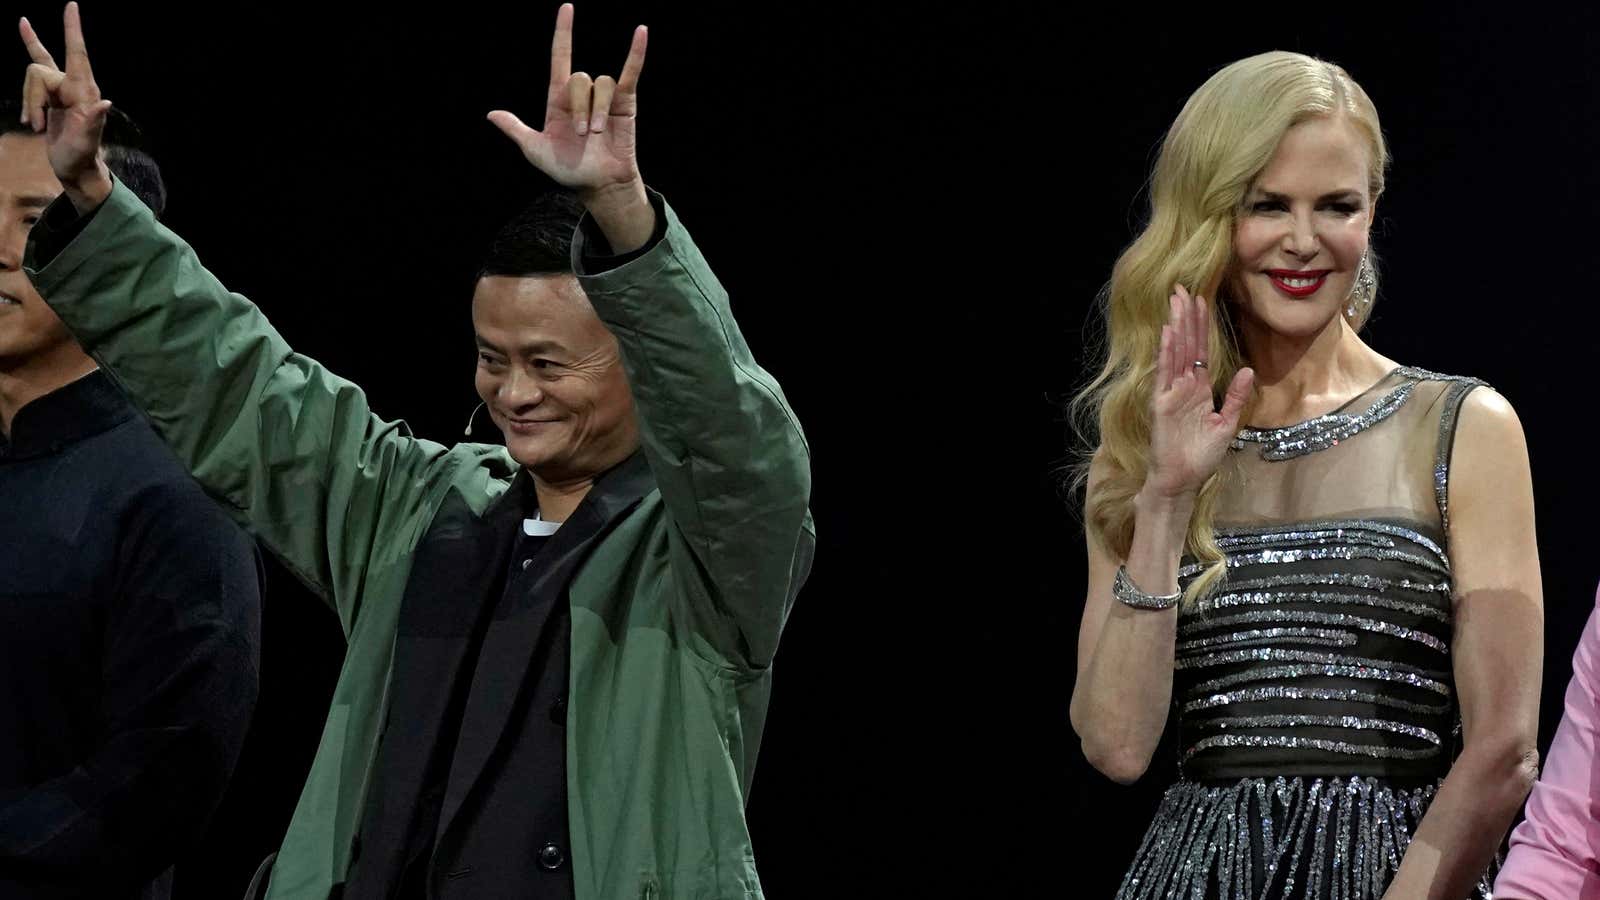 Jack Ma and actor Nicole Kidman attend a show during Alibaba Group’s 11.11 Singles’ Day global shopping festival in 2017.